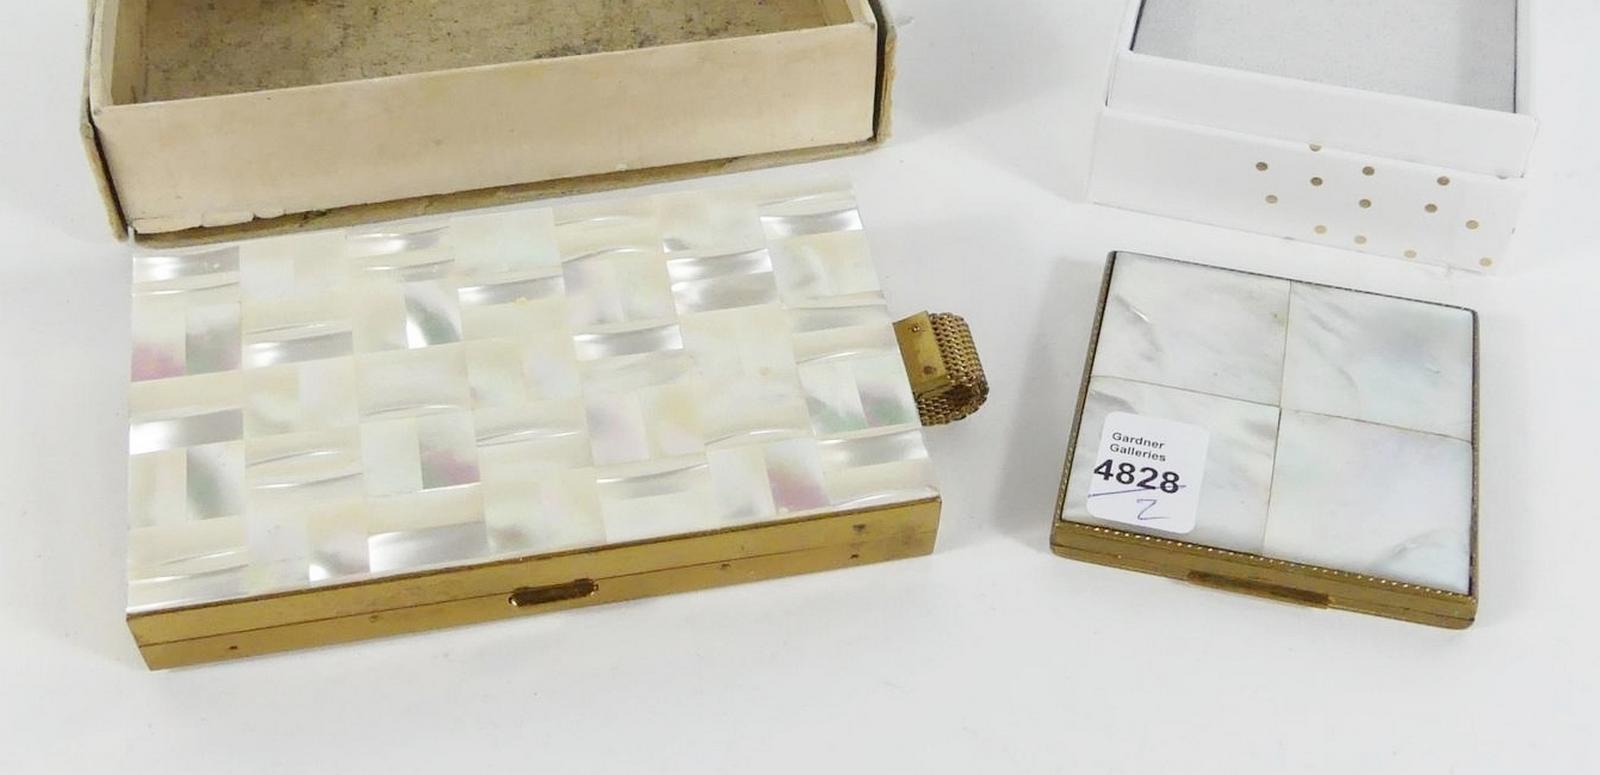 TWO MOTHER-OF-PEARL CASES